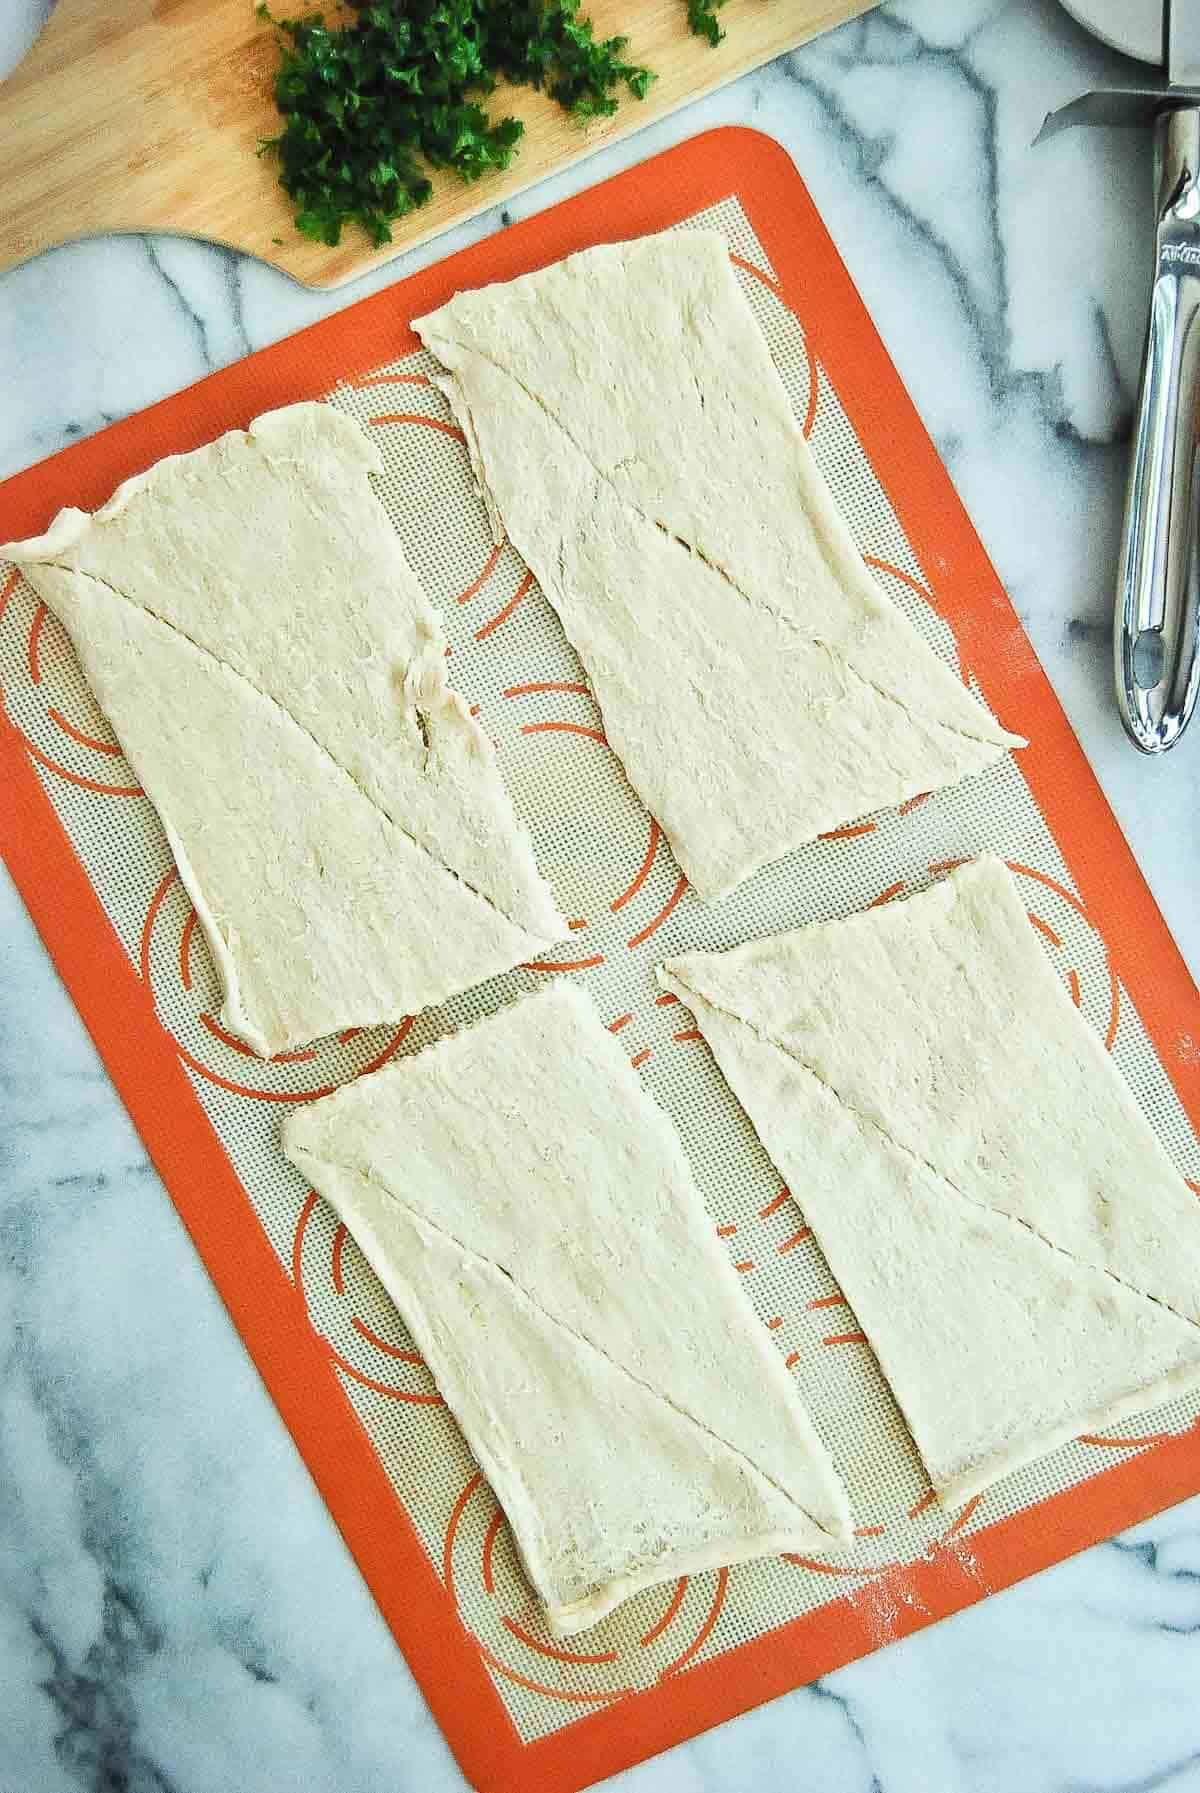 rolled out crescent roll dough into rectangles.